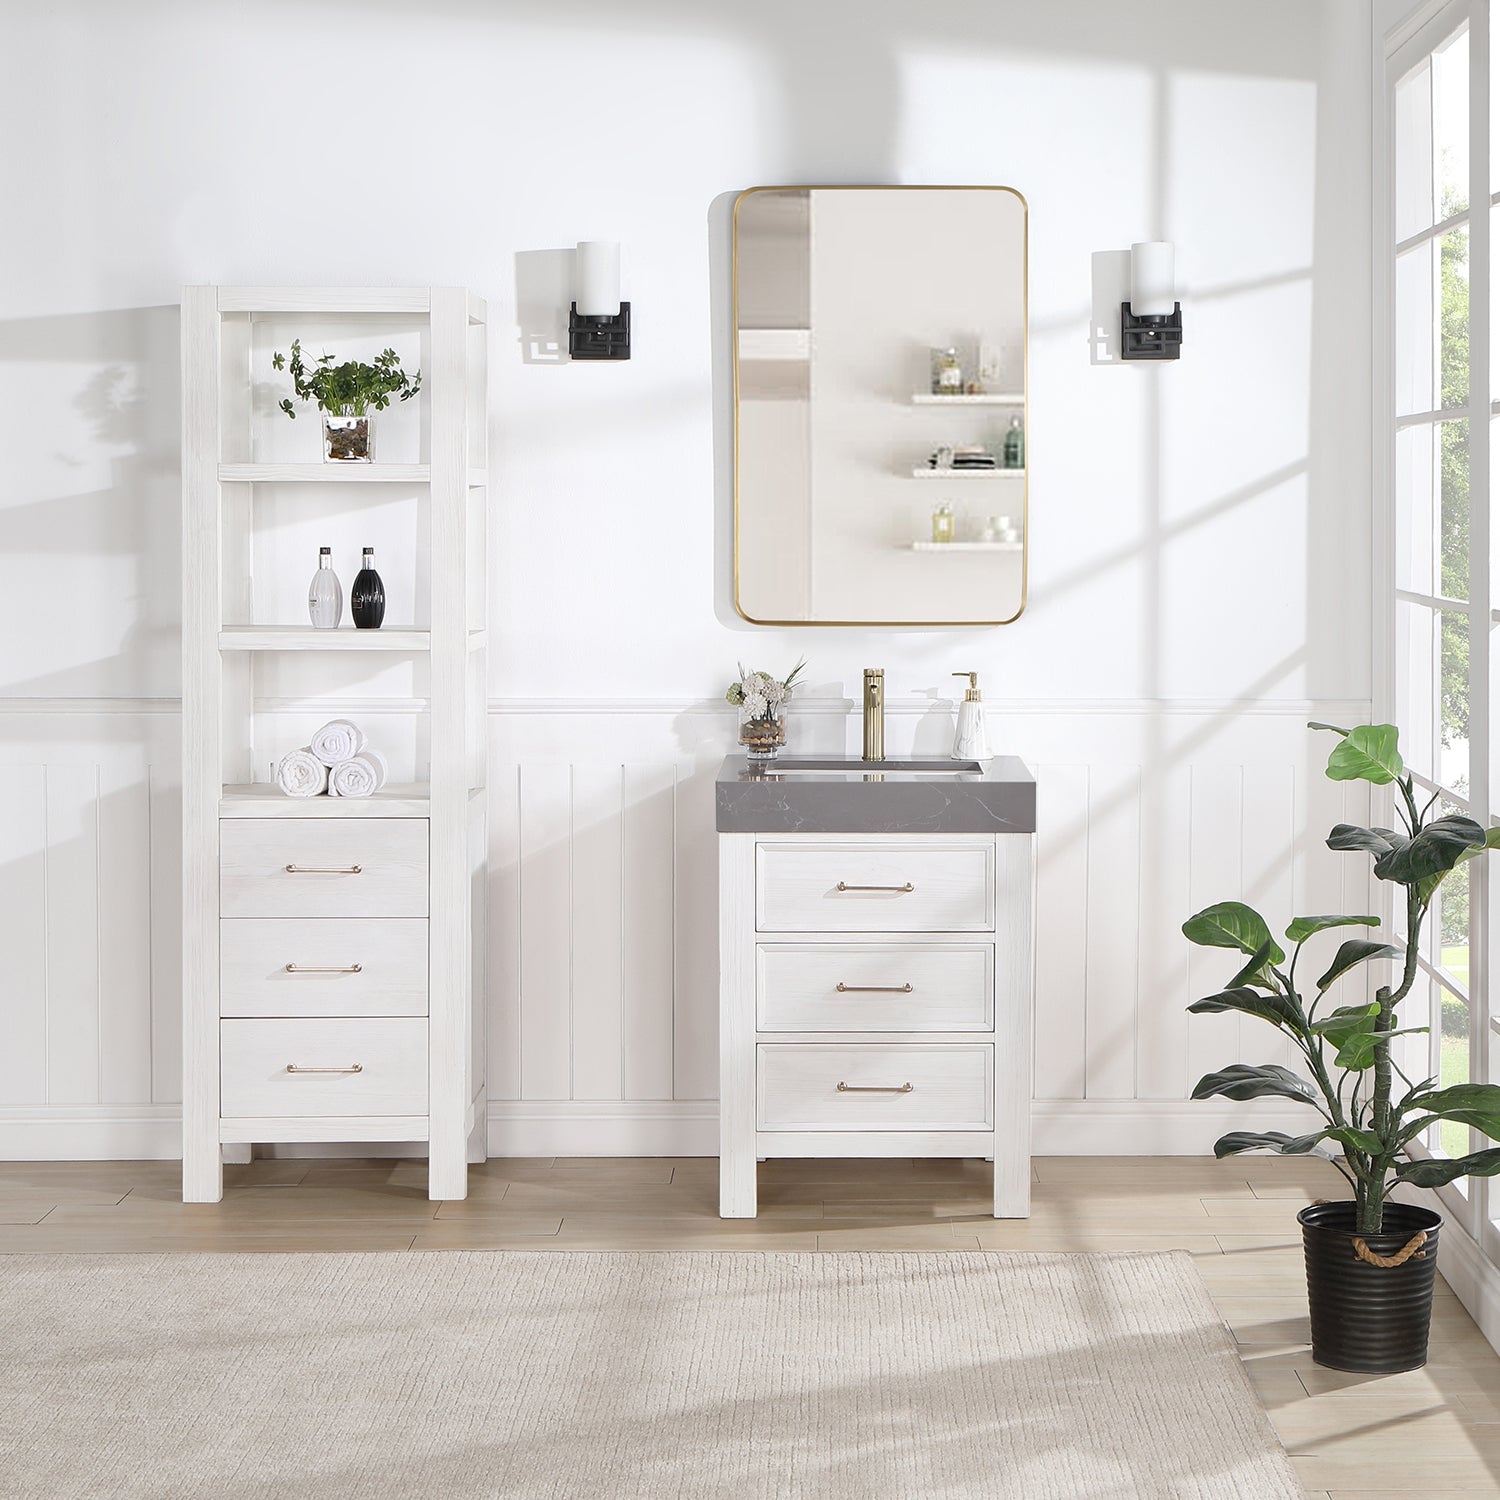 Vinnova Design León 24in. Free standing Single Bathroom Vanity in Fir Wood White with Composite top in Reticulated Grey - New Star Living